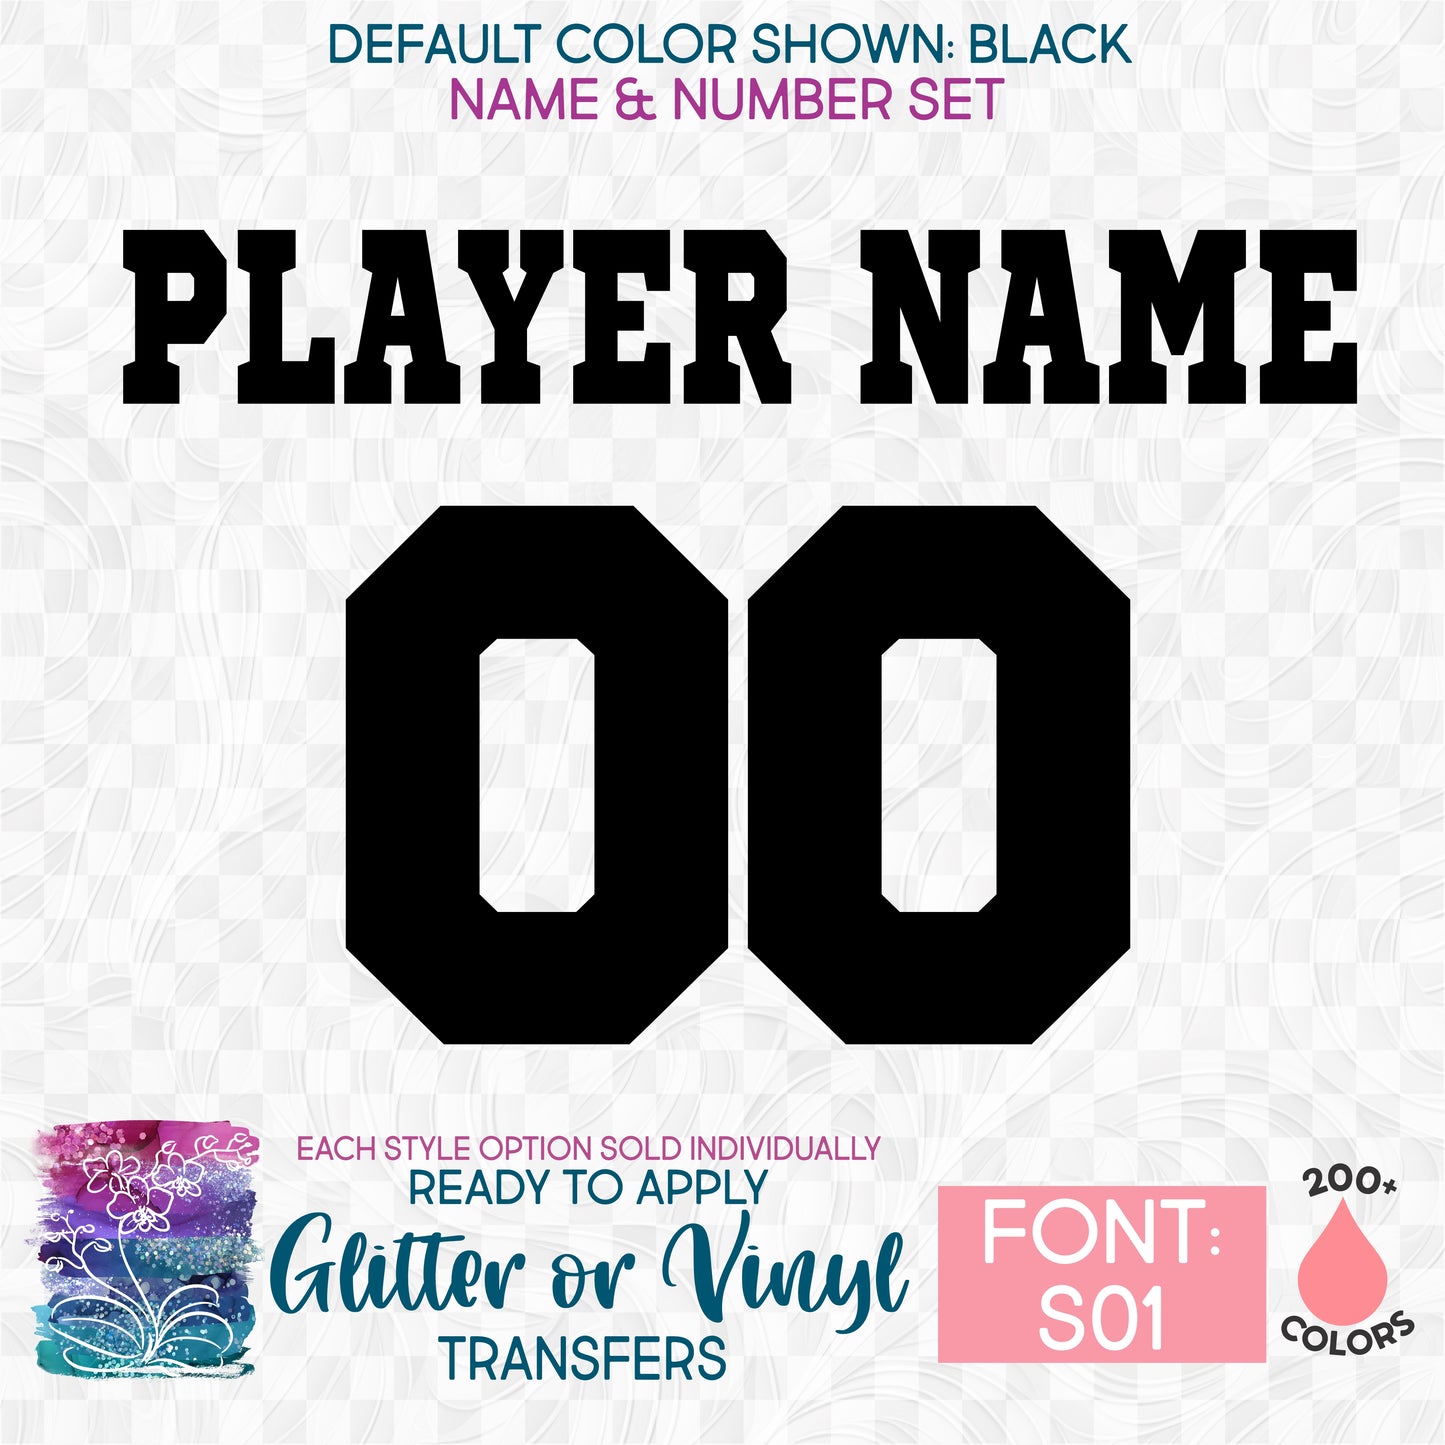 (s097-S01) Custom Player Perfect Name & Number Glitter or Vinyl Iron-On Transfer